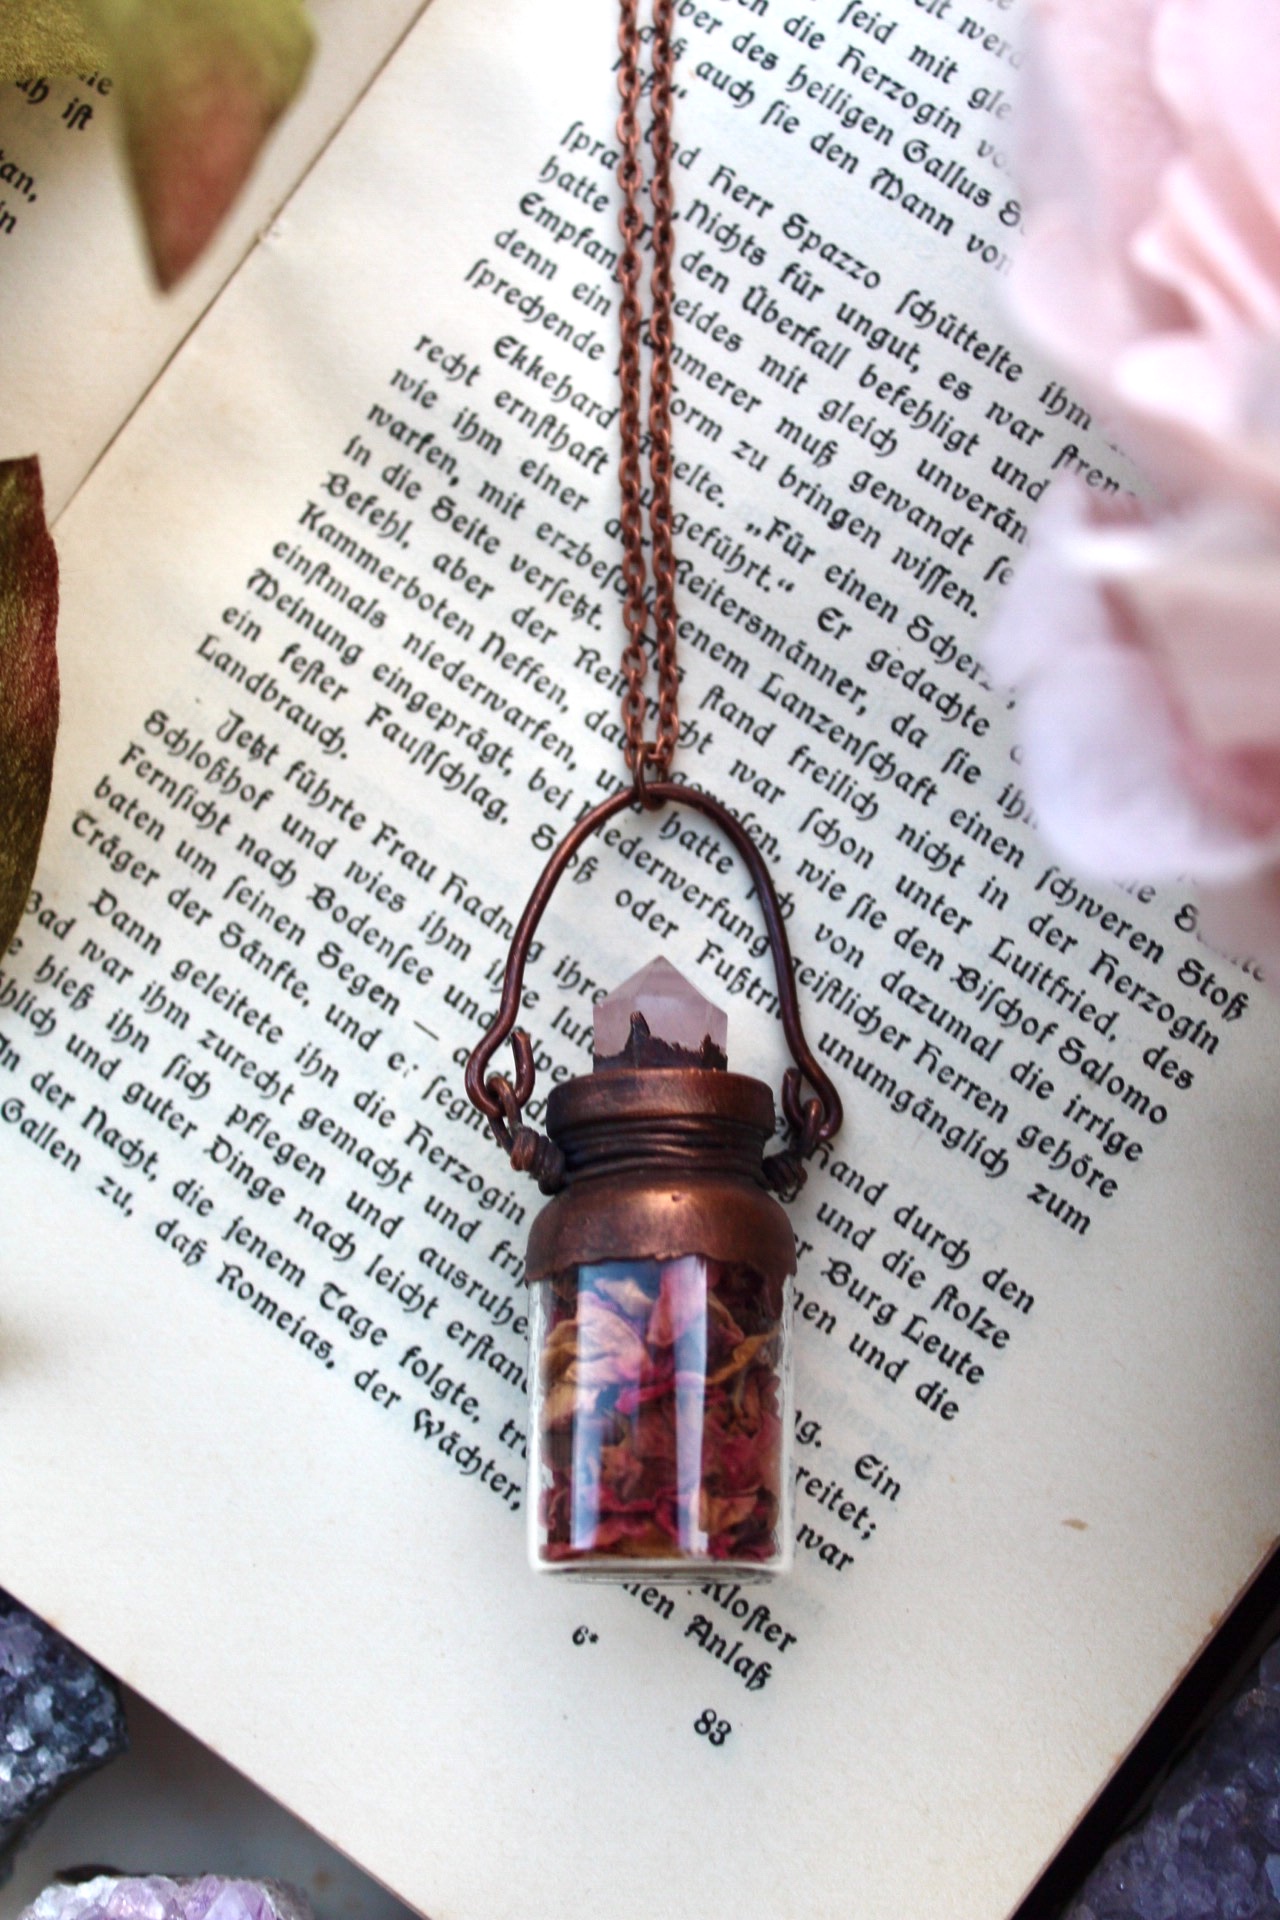 Rose Petal Necklace in a Bottle with  a Rose Quartz Crystal Point